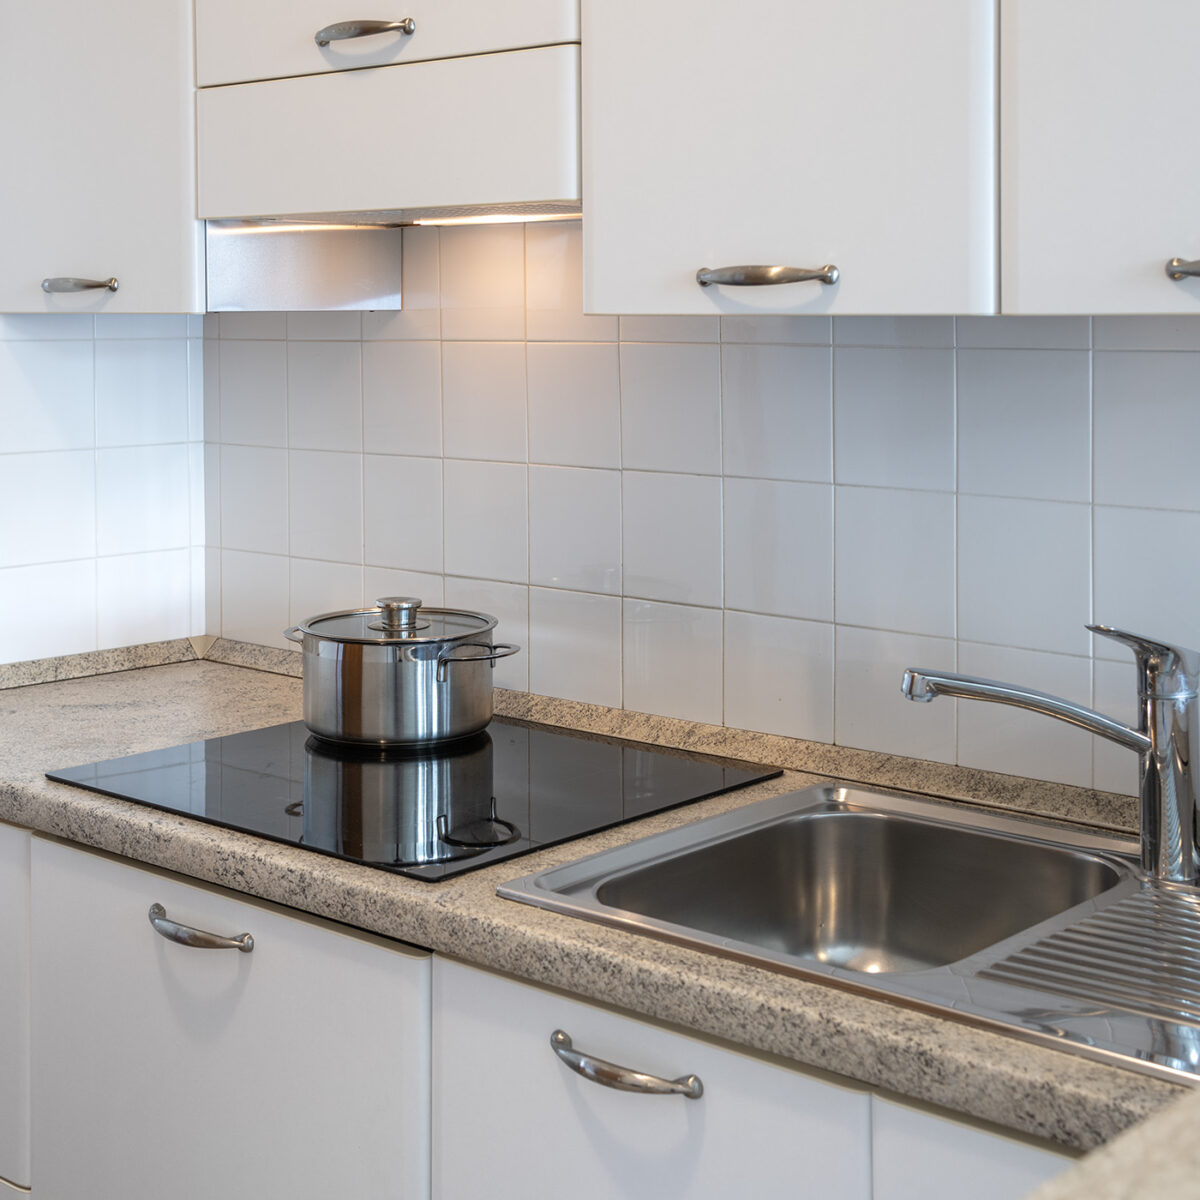 The well-equipped kitchenette boasts modern amenities